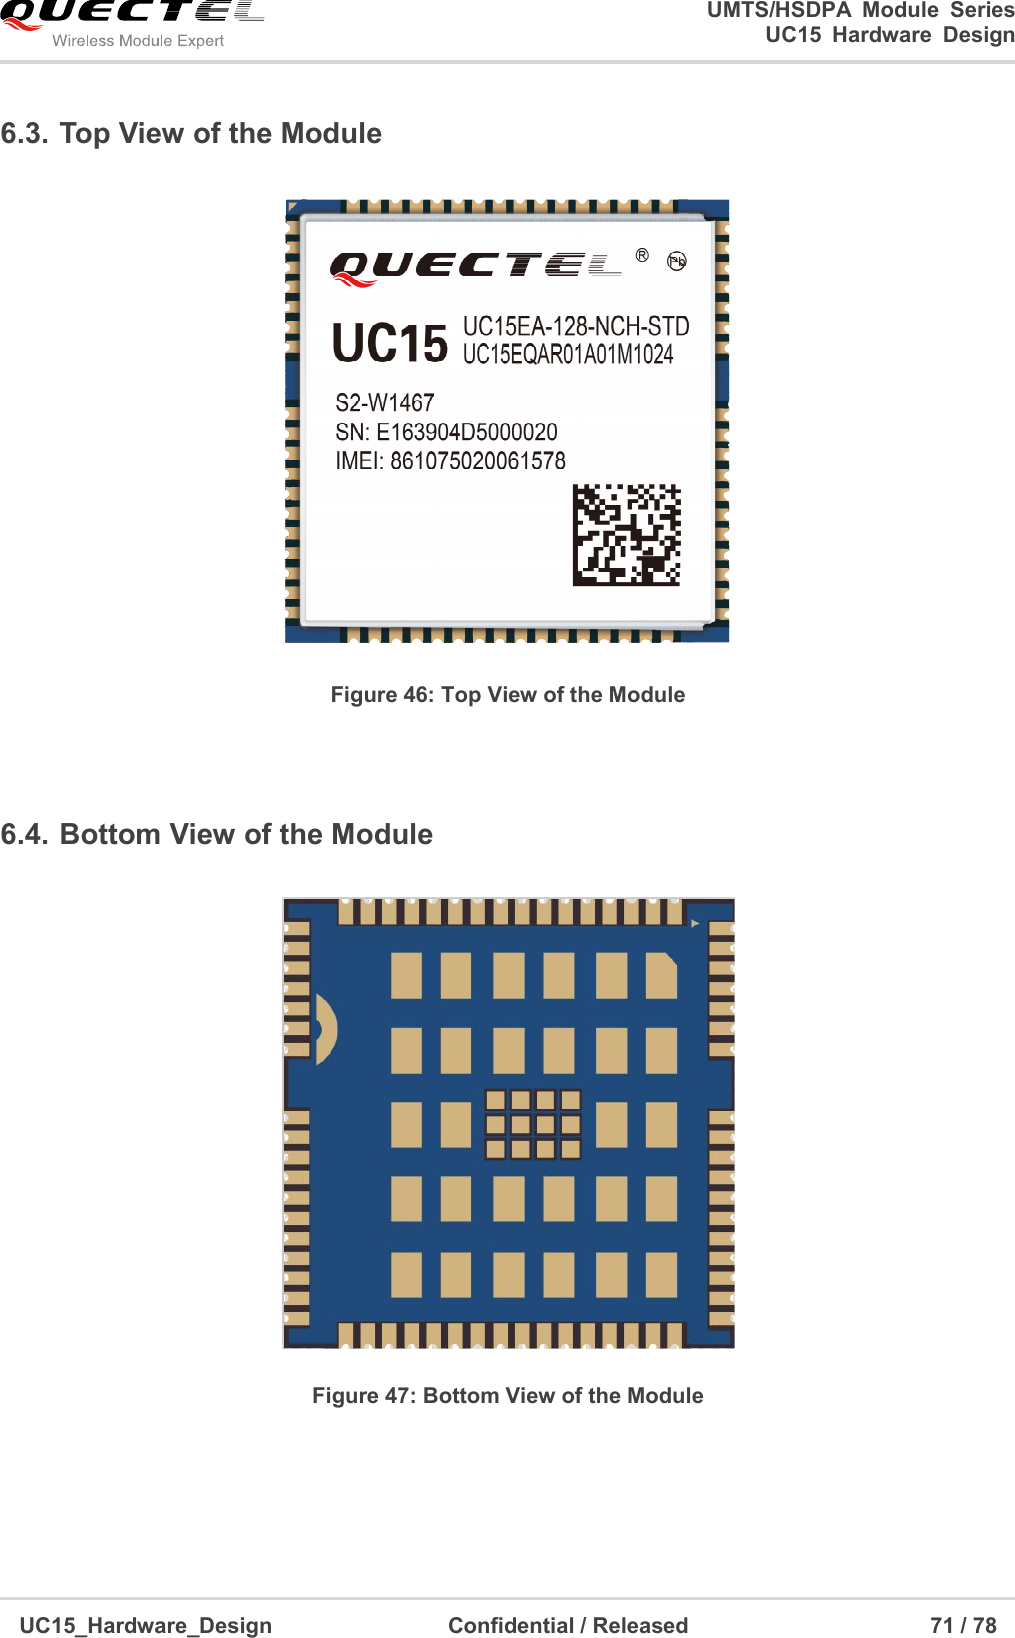                                                                        UMTS/HSDPA  Module  Series                                                                 UC15 Hardware Design  UC15_Hardware_Design                                Confidential / Released                                            71 / 78    6.3. Top View of the Module  Figure 46: Top View of the Module  6.4. Bottom View of the Module  Figure 47: Bottom View of the Module 